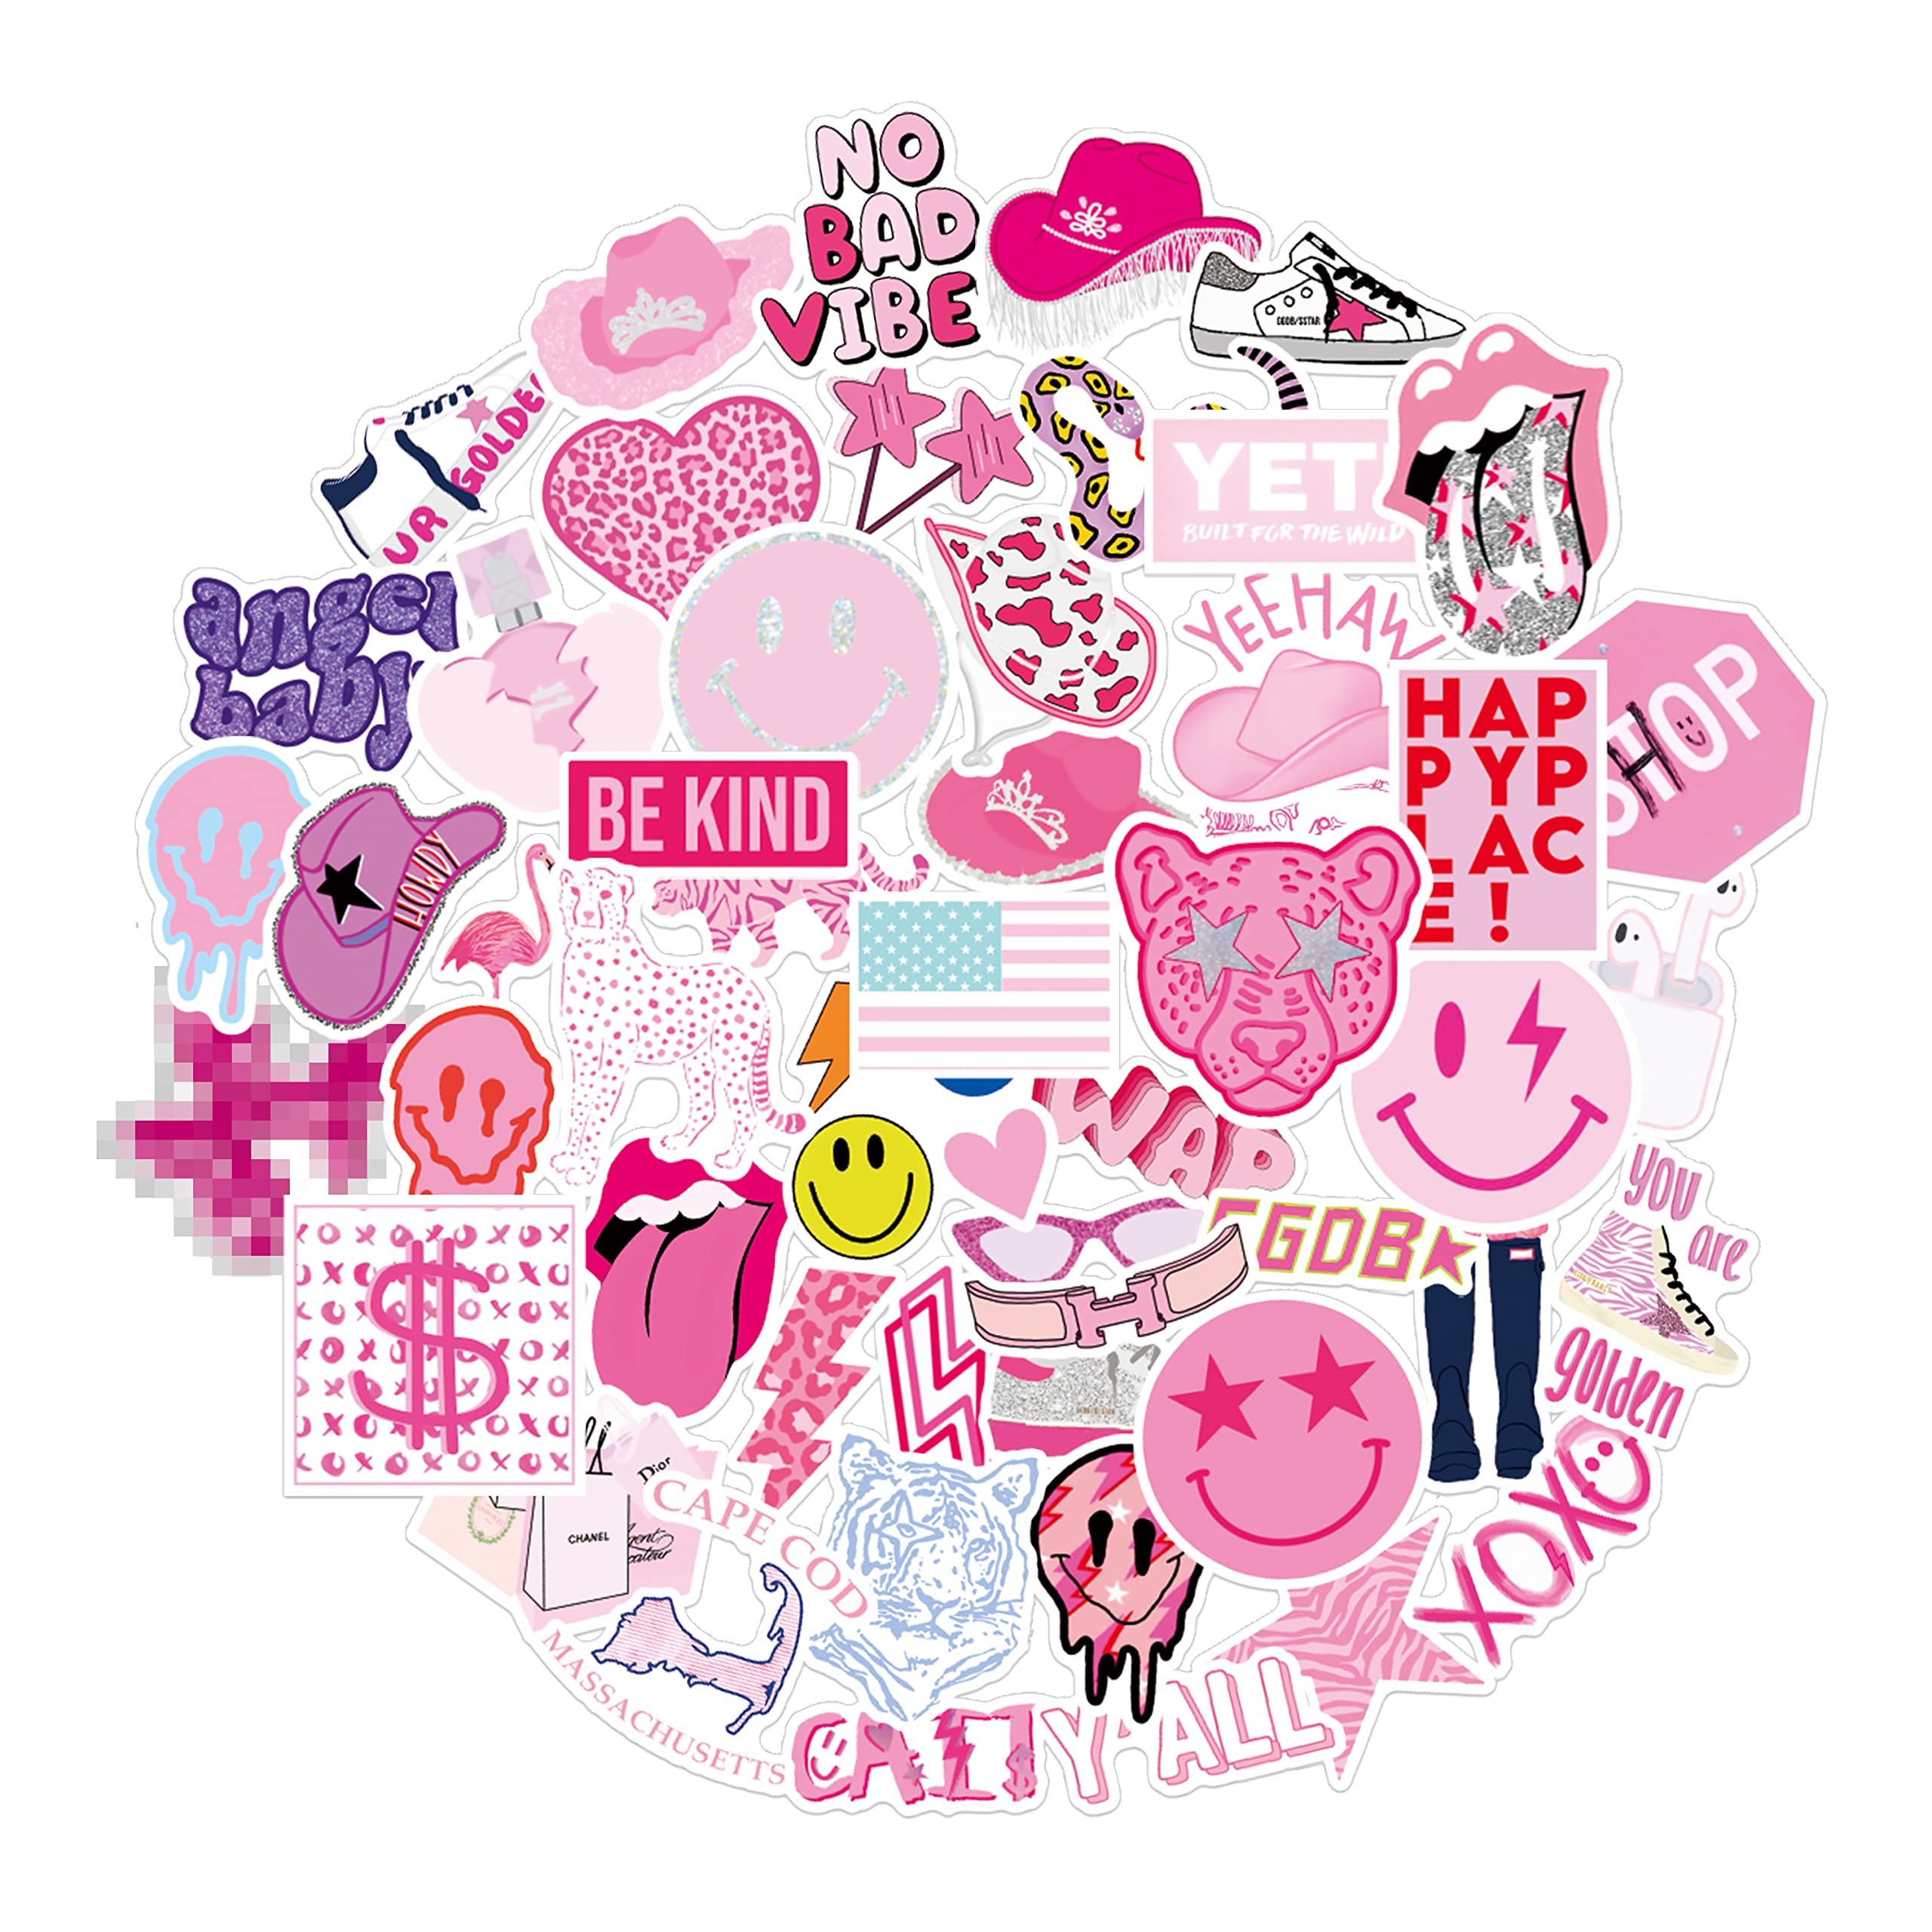 52Pcs Preppy Smile Happy Face Bolt Vinyl Sticker Party Supplies Cowgirl Vinyl Waterproof Sticker Aesthetic Stickers Decor Pink Party Mobile Phone Stickers for Laptop Water Bottle Potion Bottle